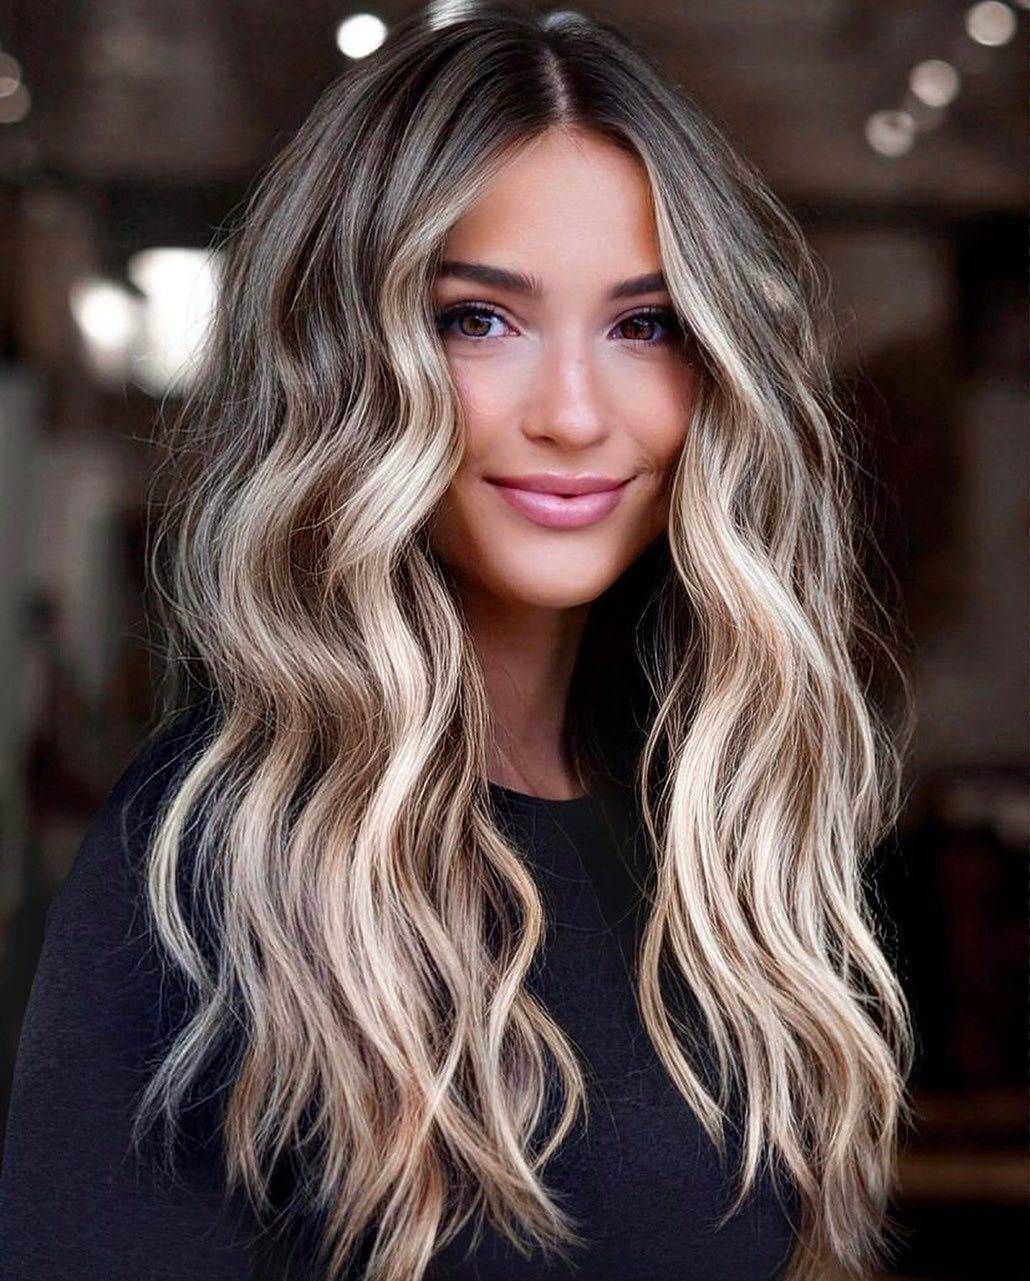 40 Greatest Long Hairstyles For Women With Long Hair In 2021 images 2